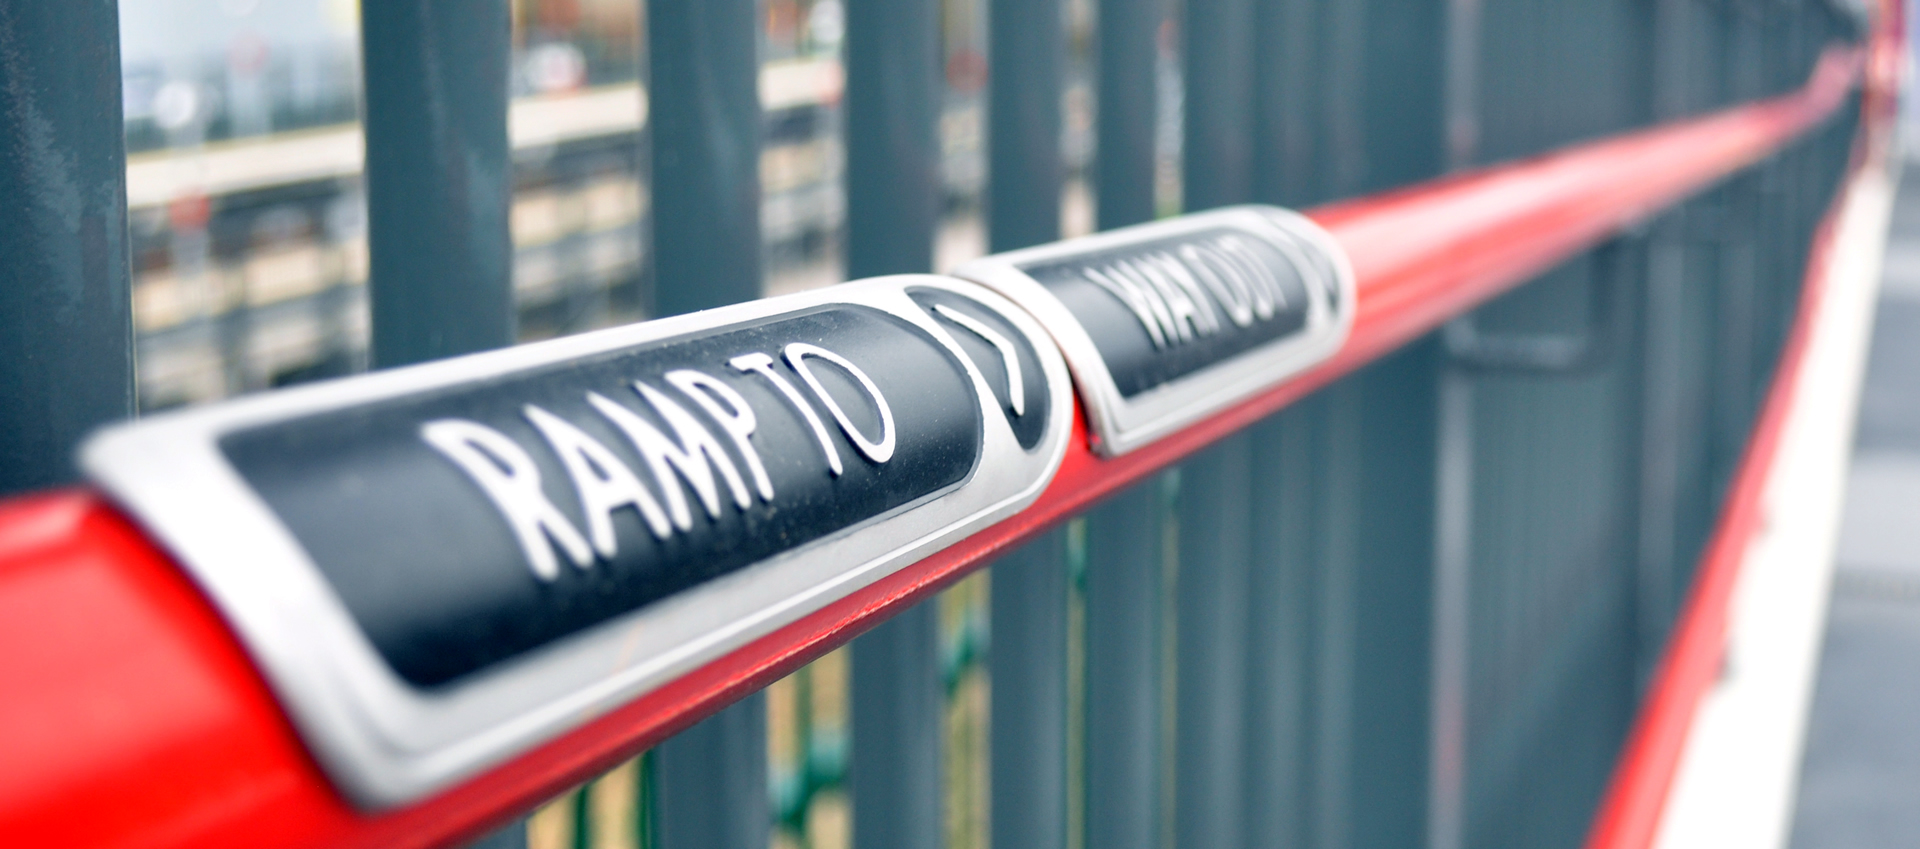 Photo: handrail and sign at Low Moor Station